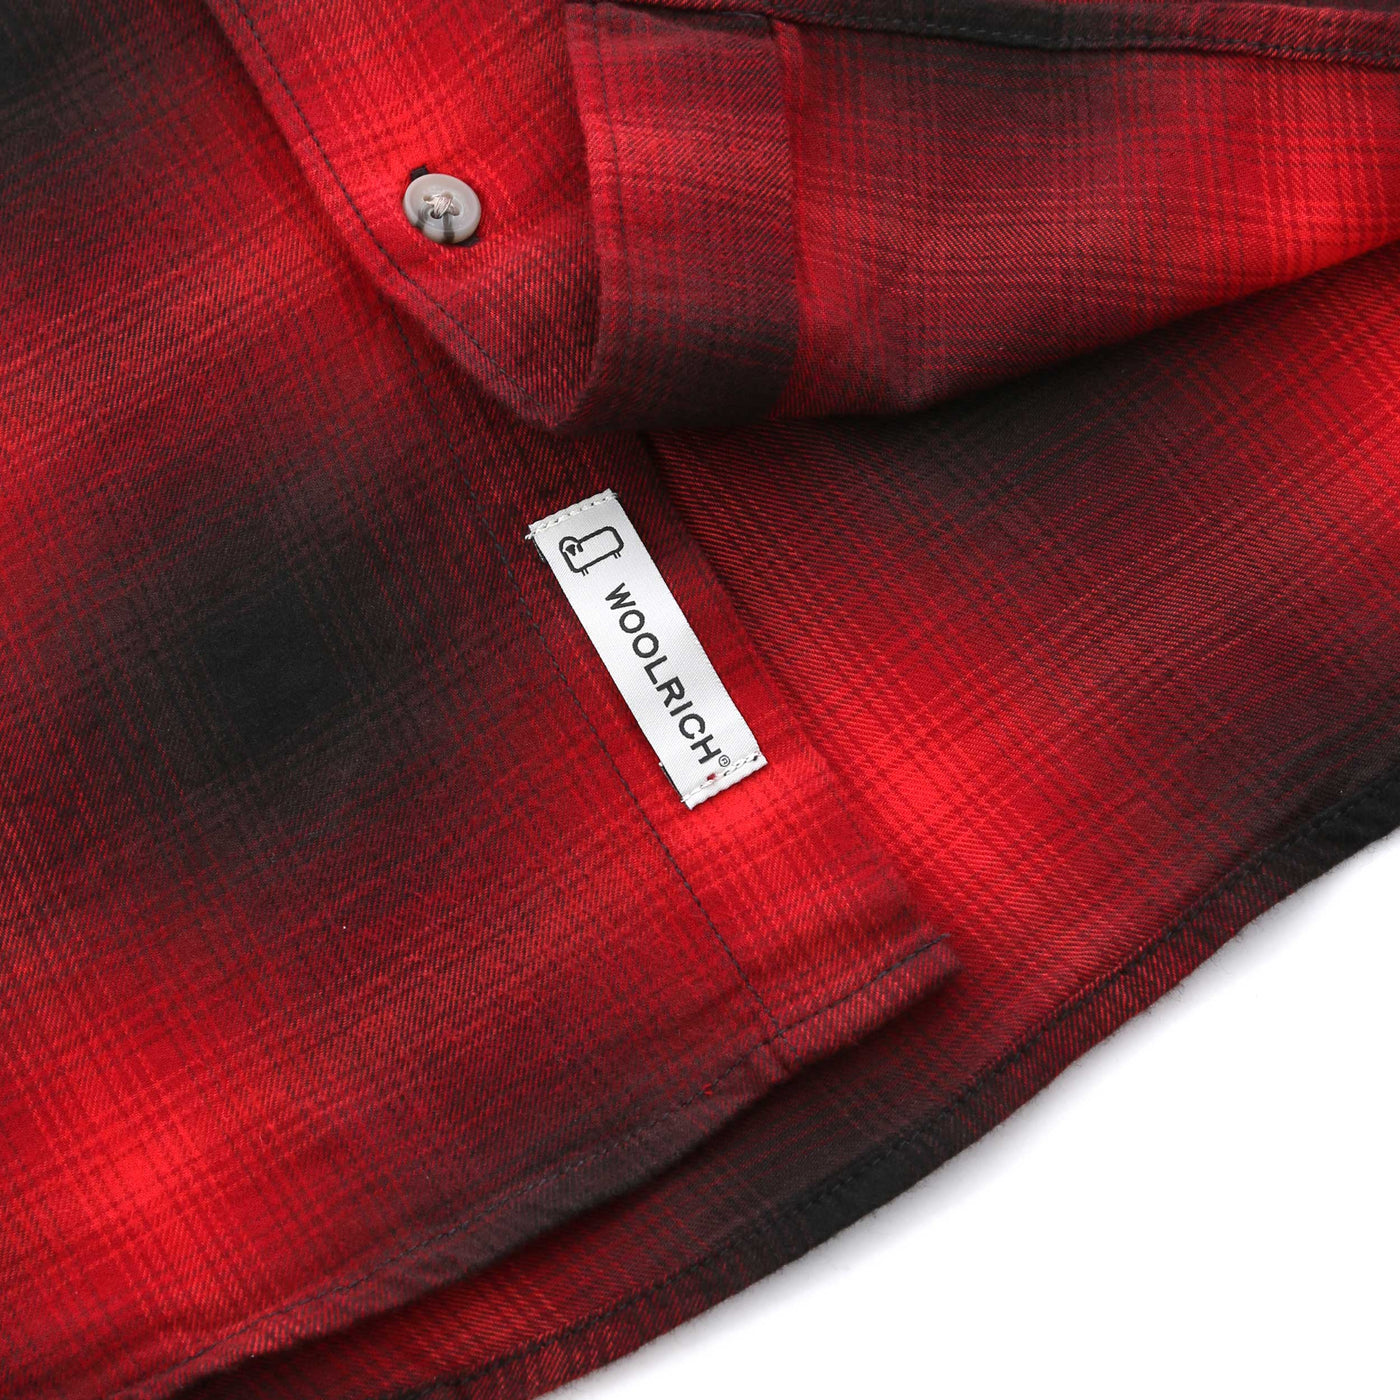 Woolrich Light Flannel Check Shirt in Red Check Logo Badge